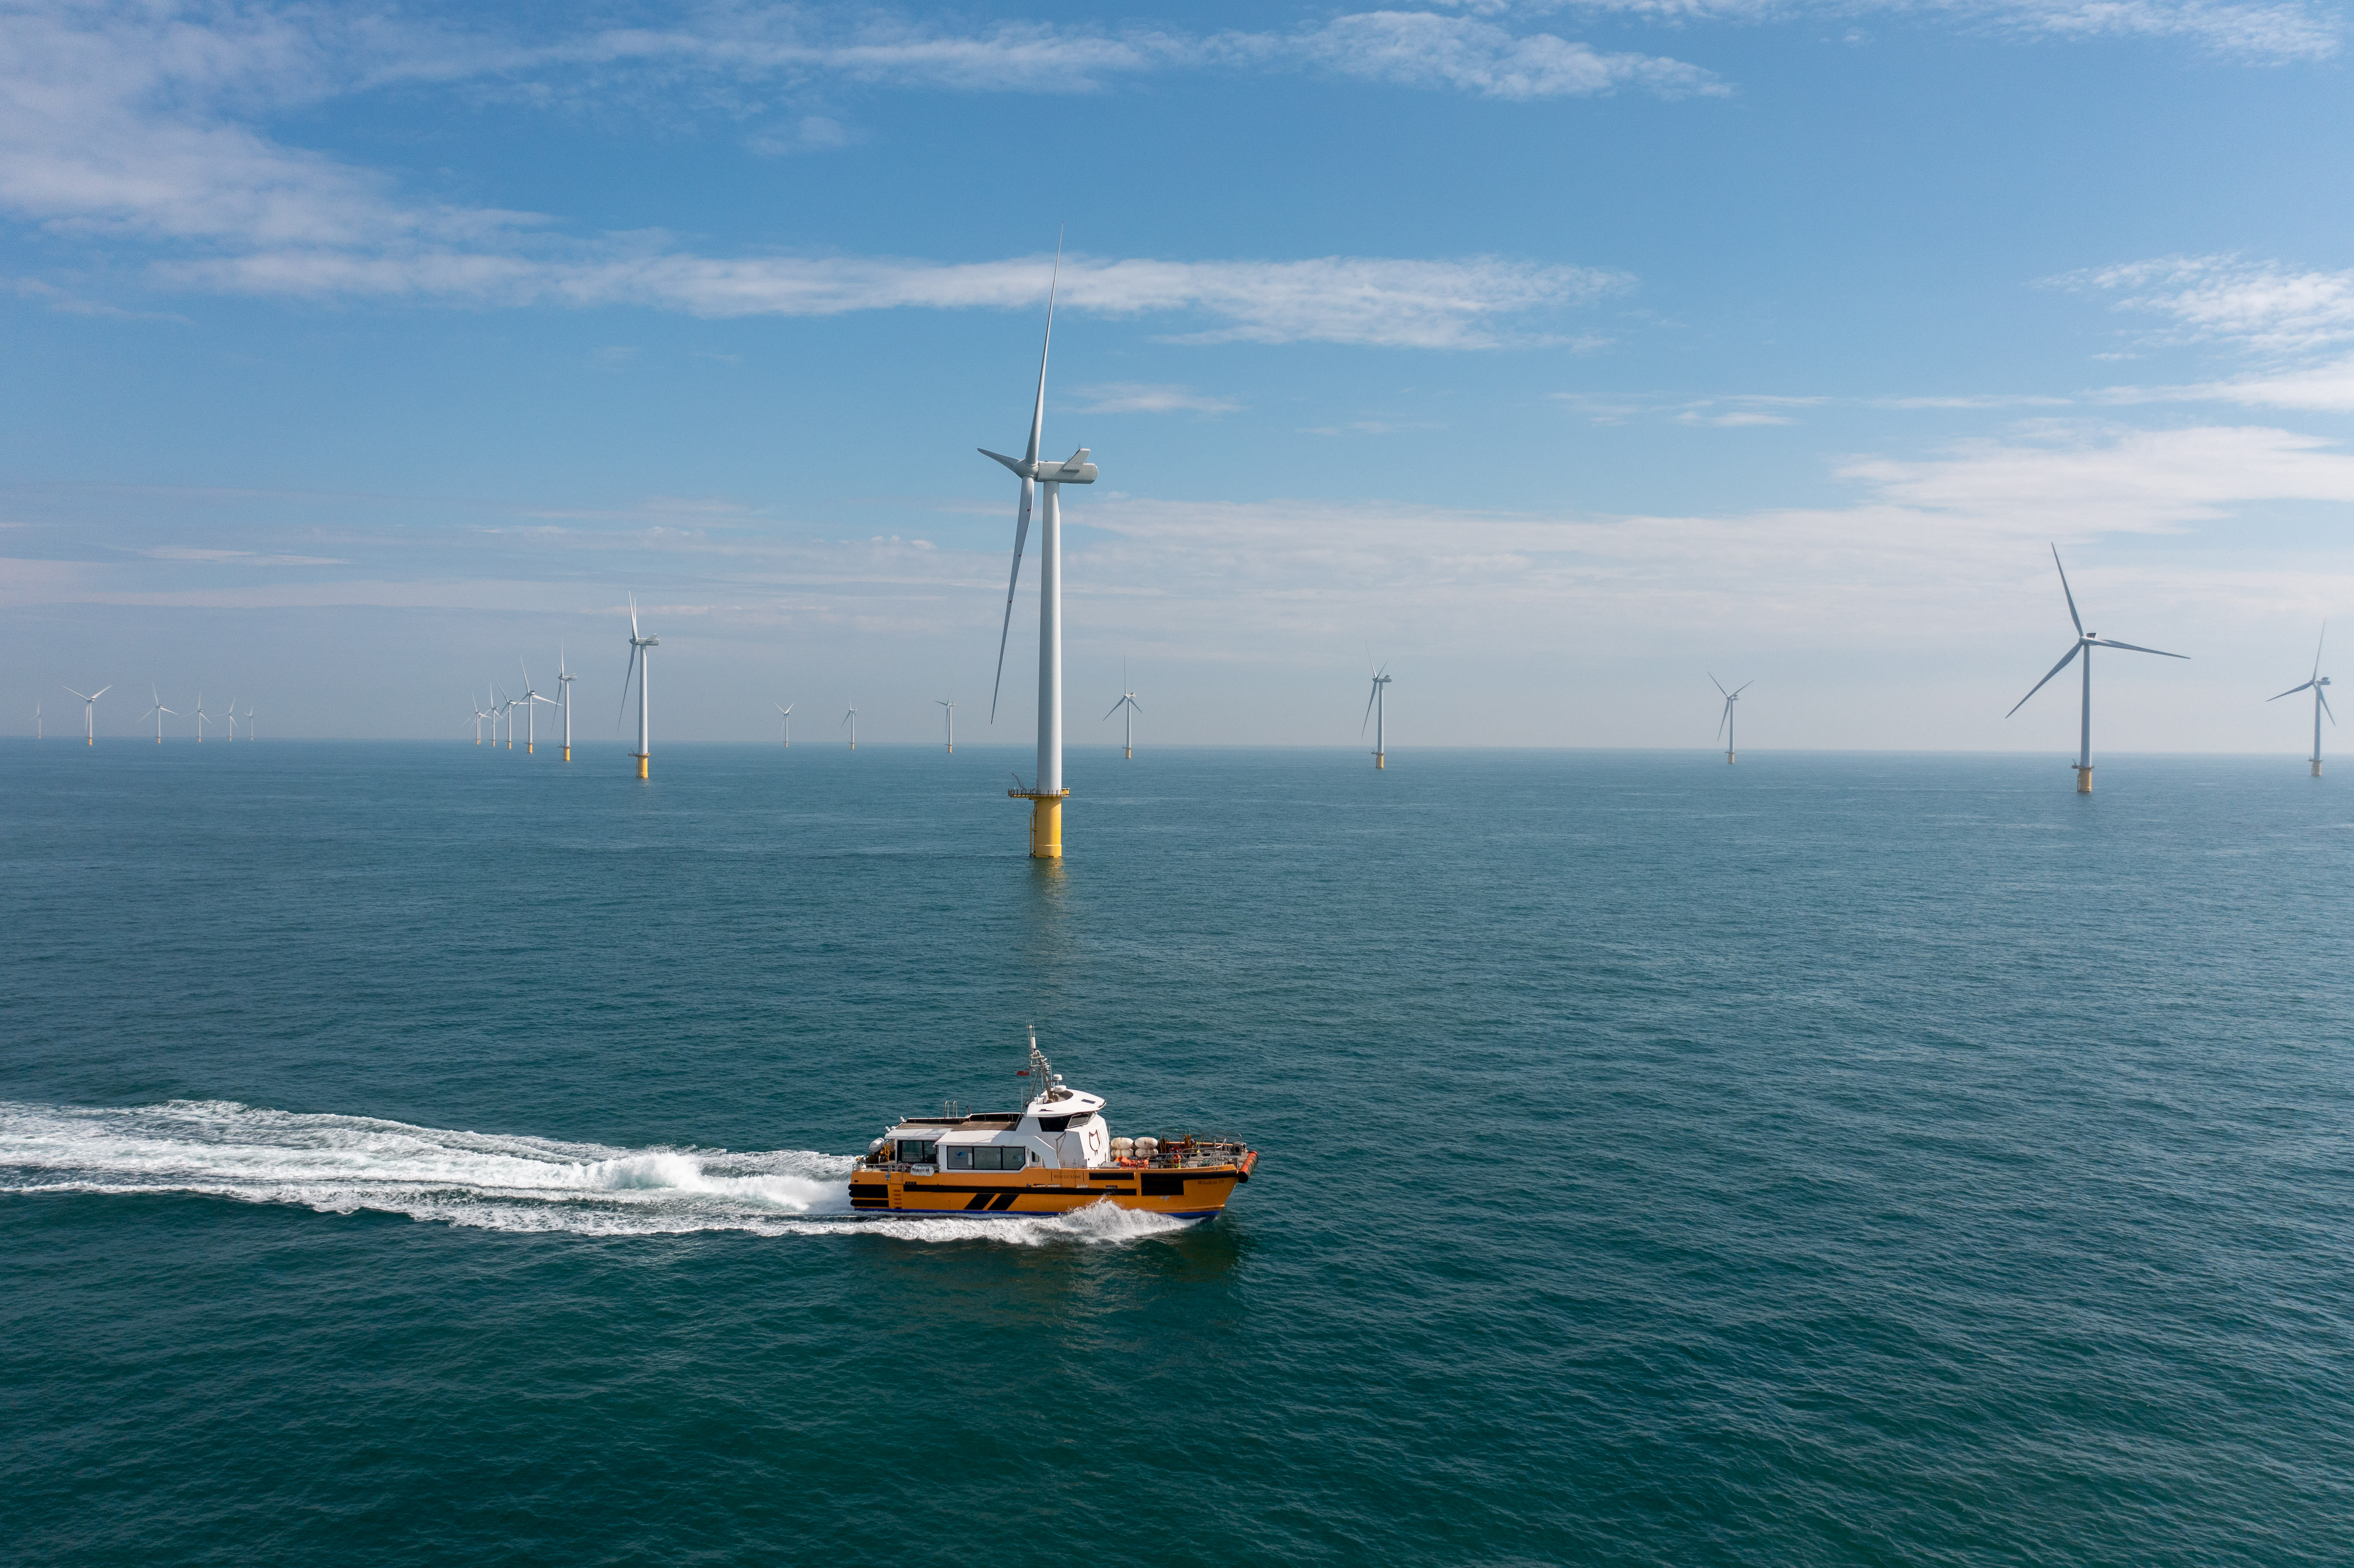 A boat moving in front of offshore wind turbines